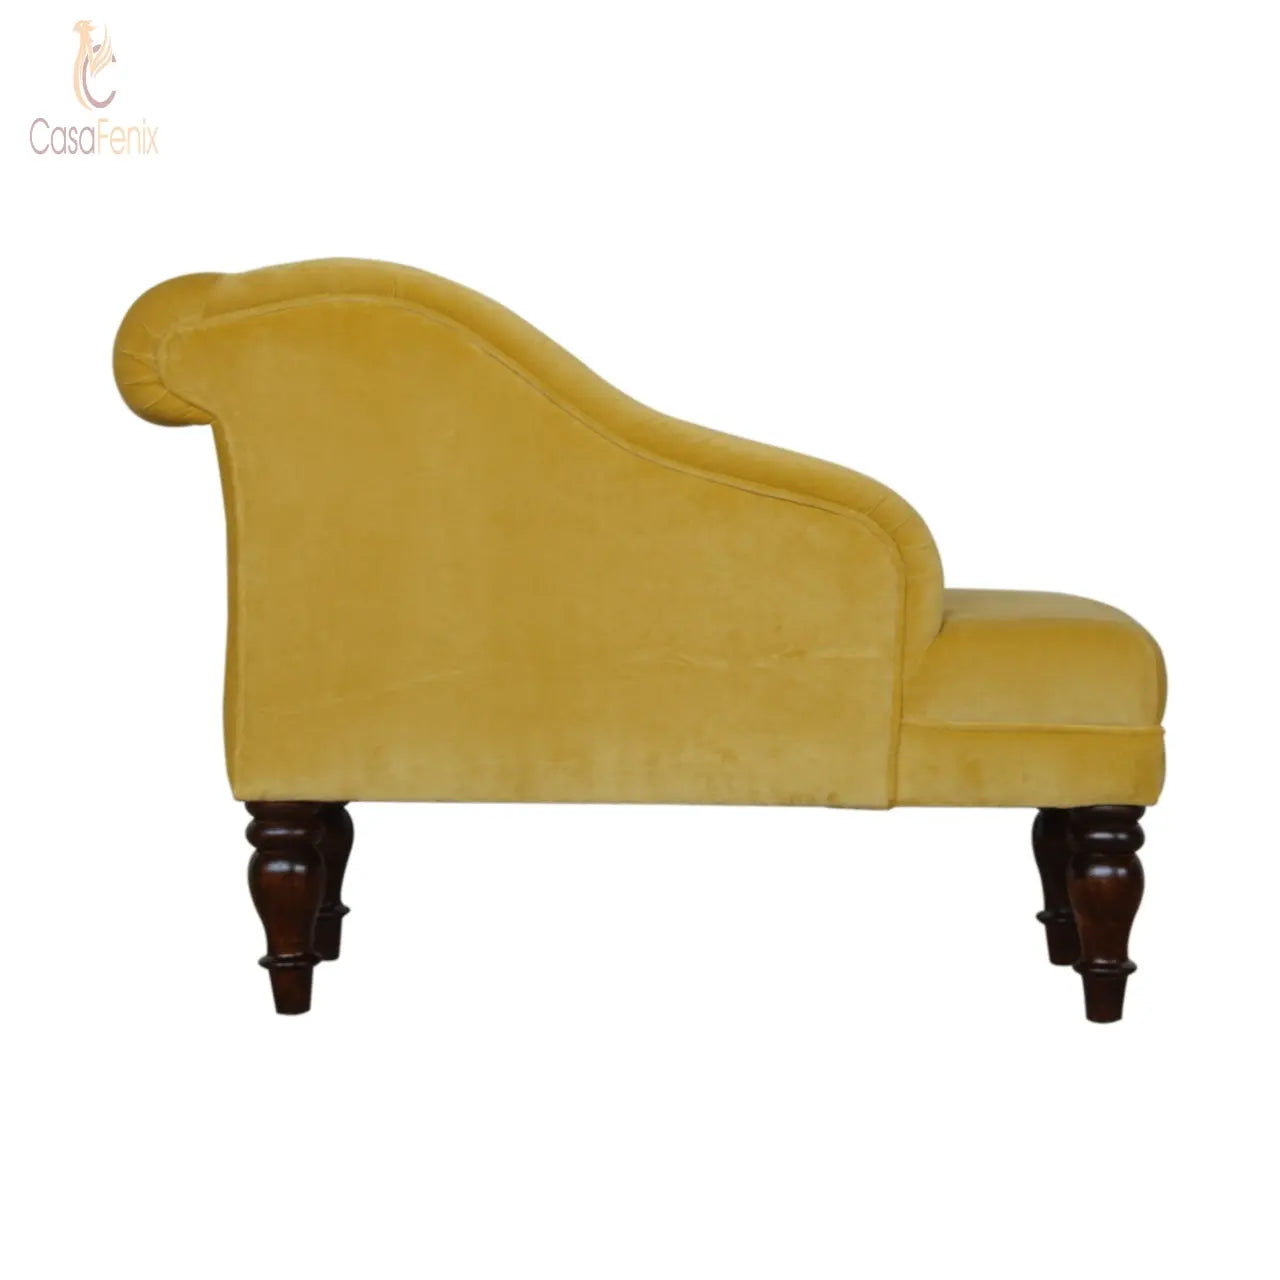 Mustard Velvet Chaise Chair / Seat 100% solid wood in a walnut finish - CasaFenix